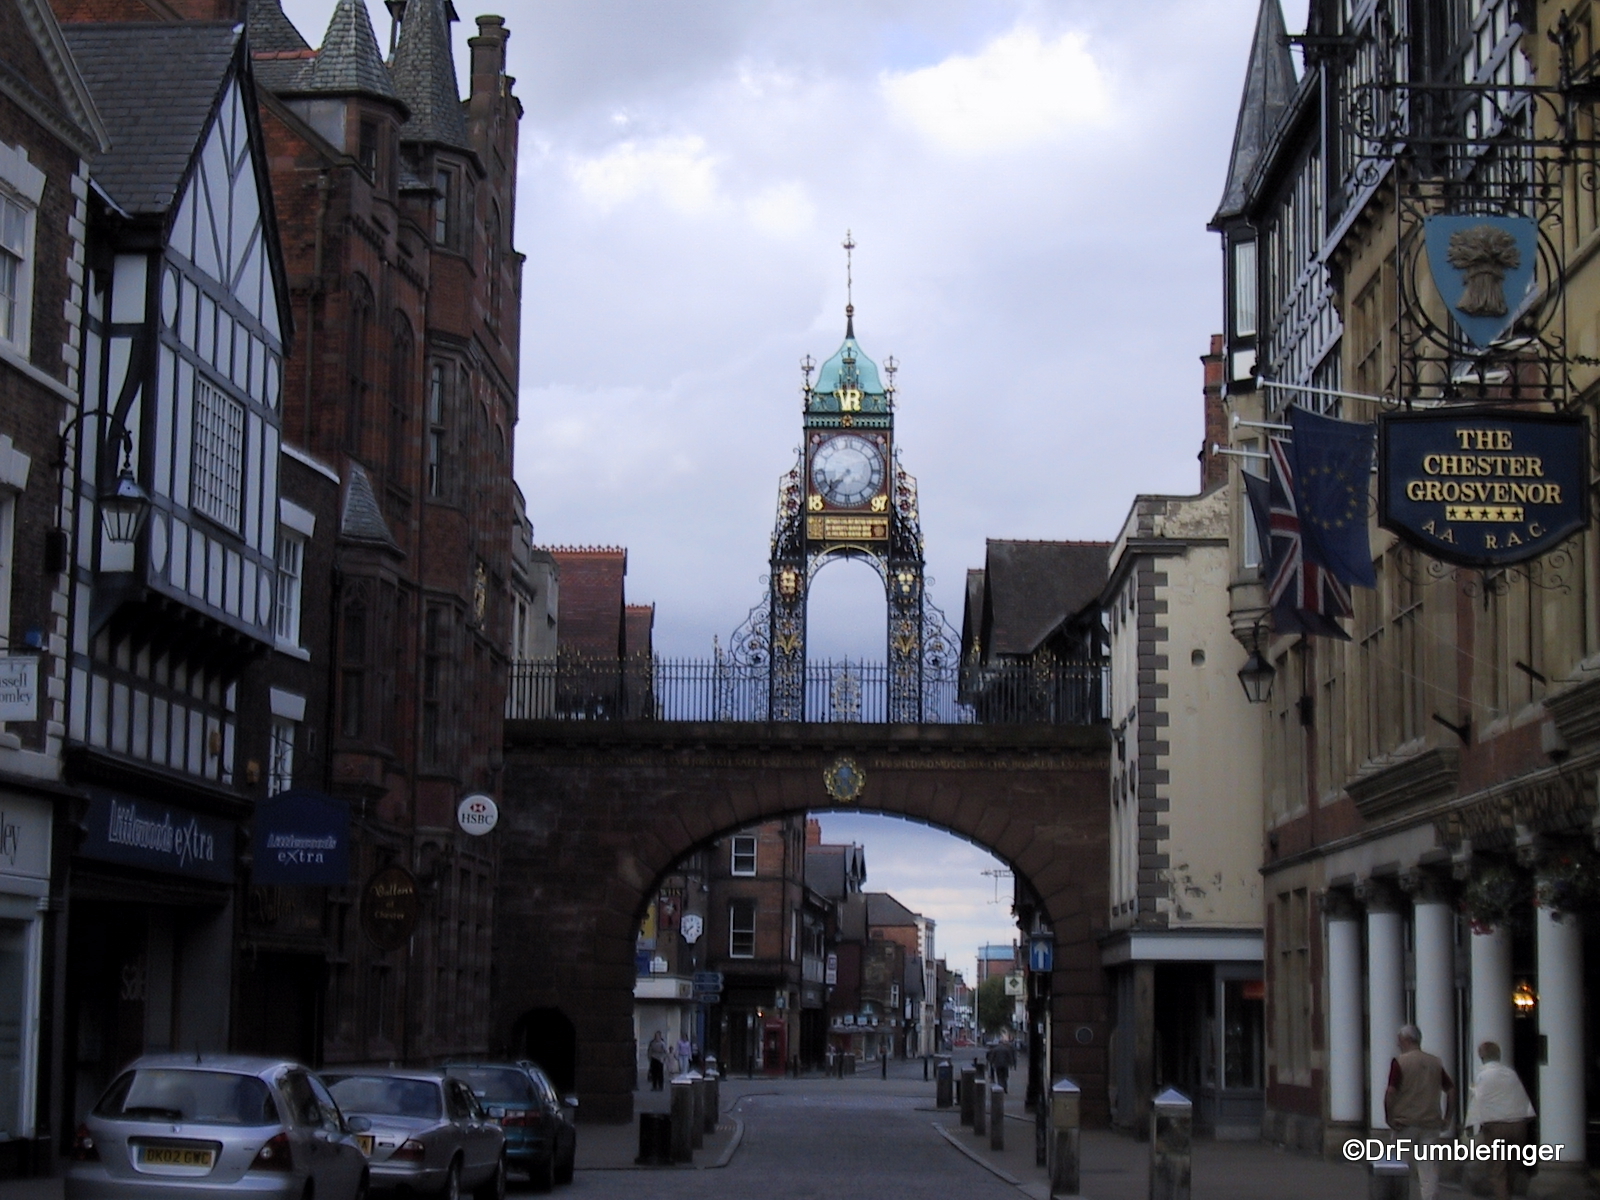 Old Clock, City Gates and street, Chester